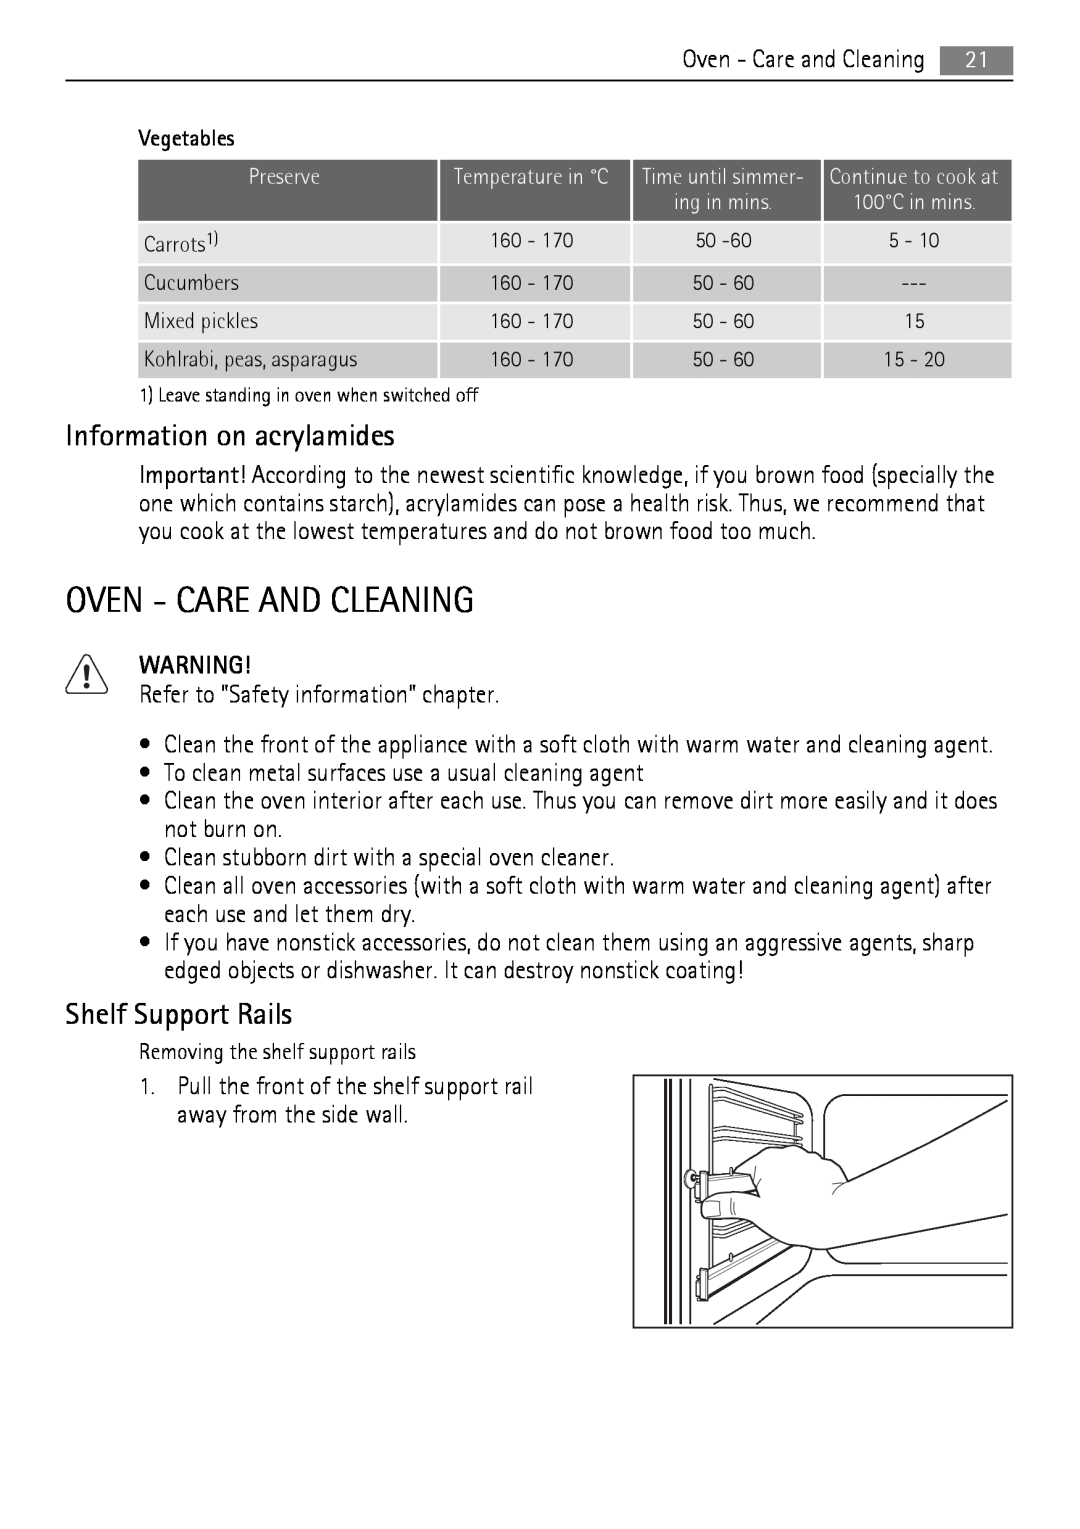 Electrolux 40036VI-WN user manual Oven - Care And Cleaning, Information on acrylamides, Shelf Support Rails 